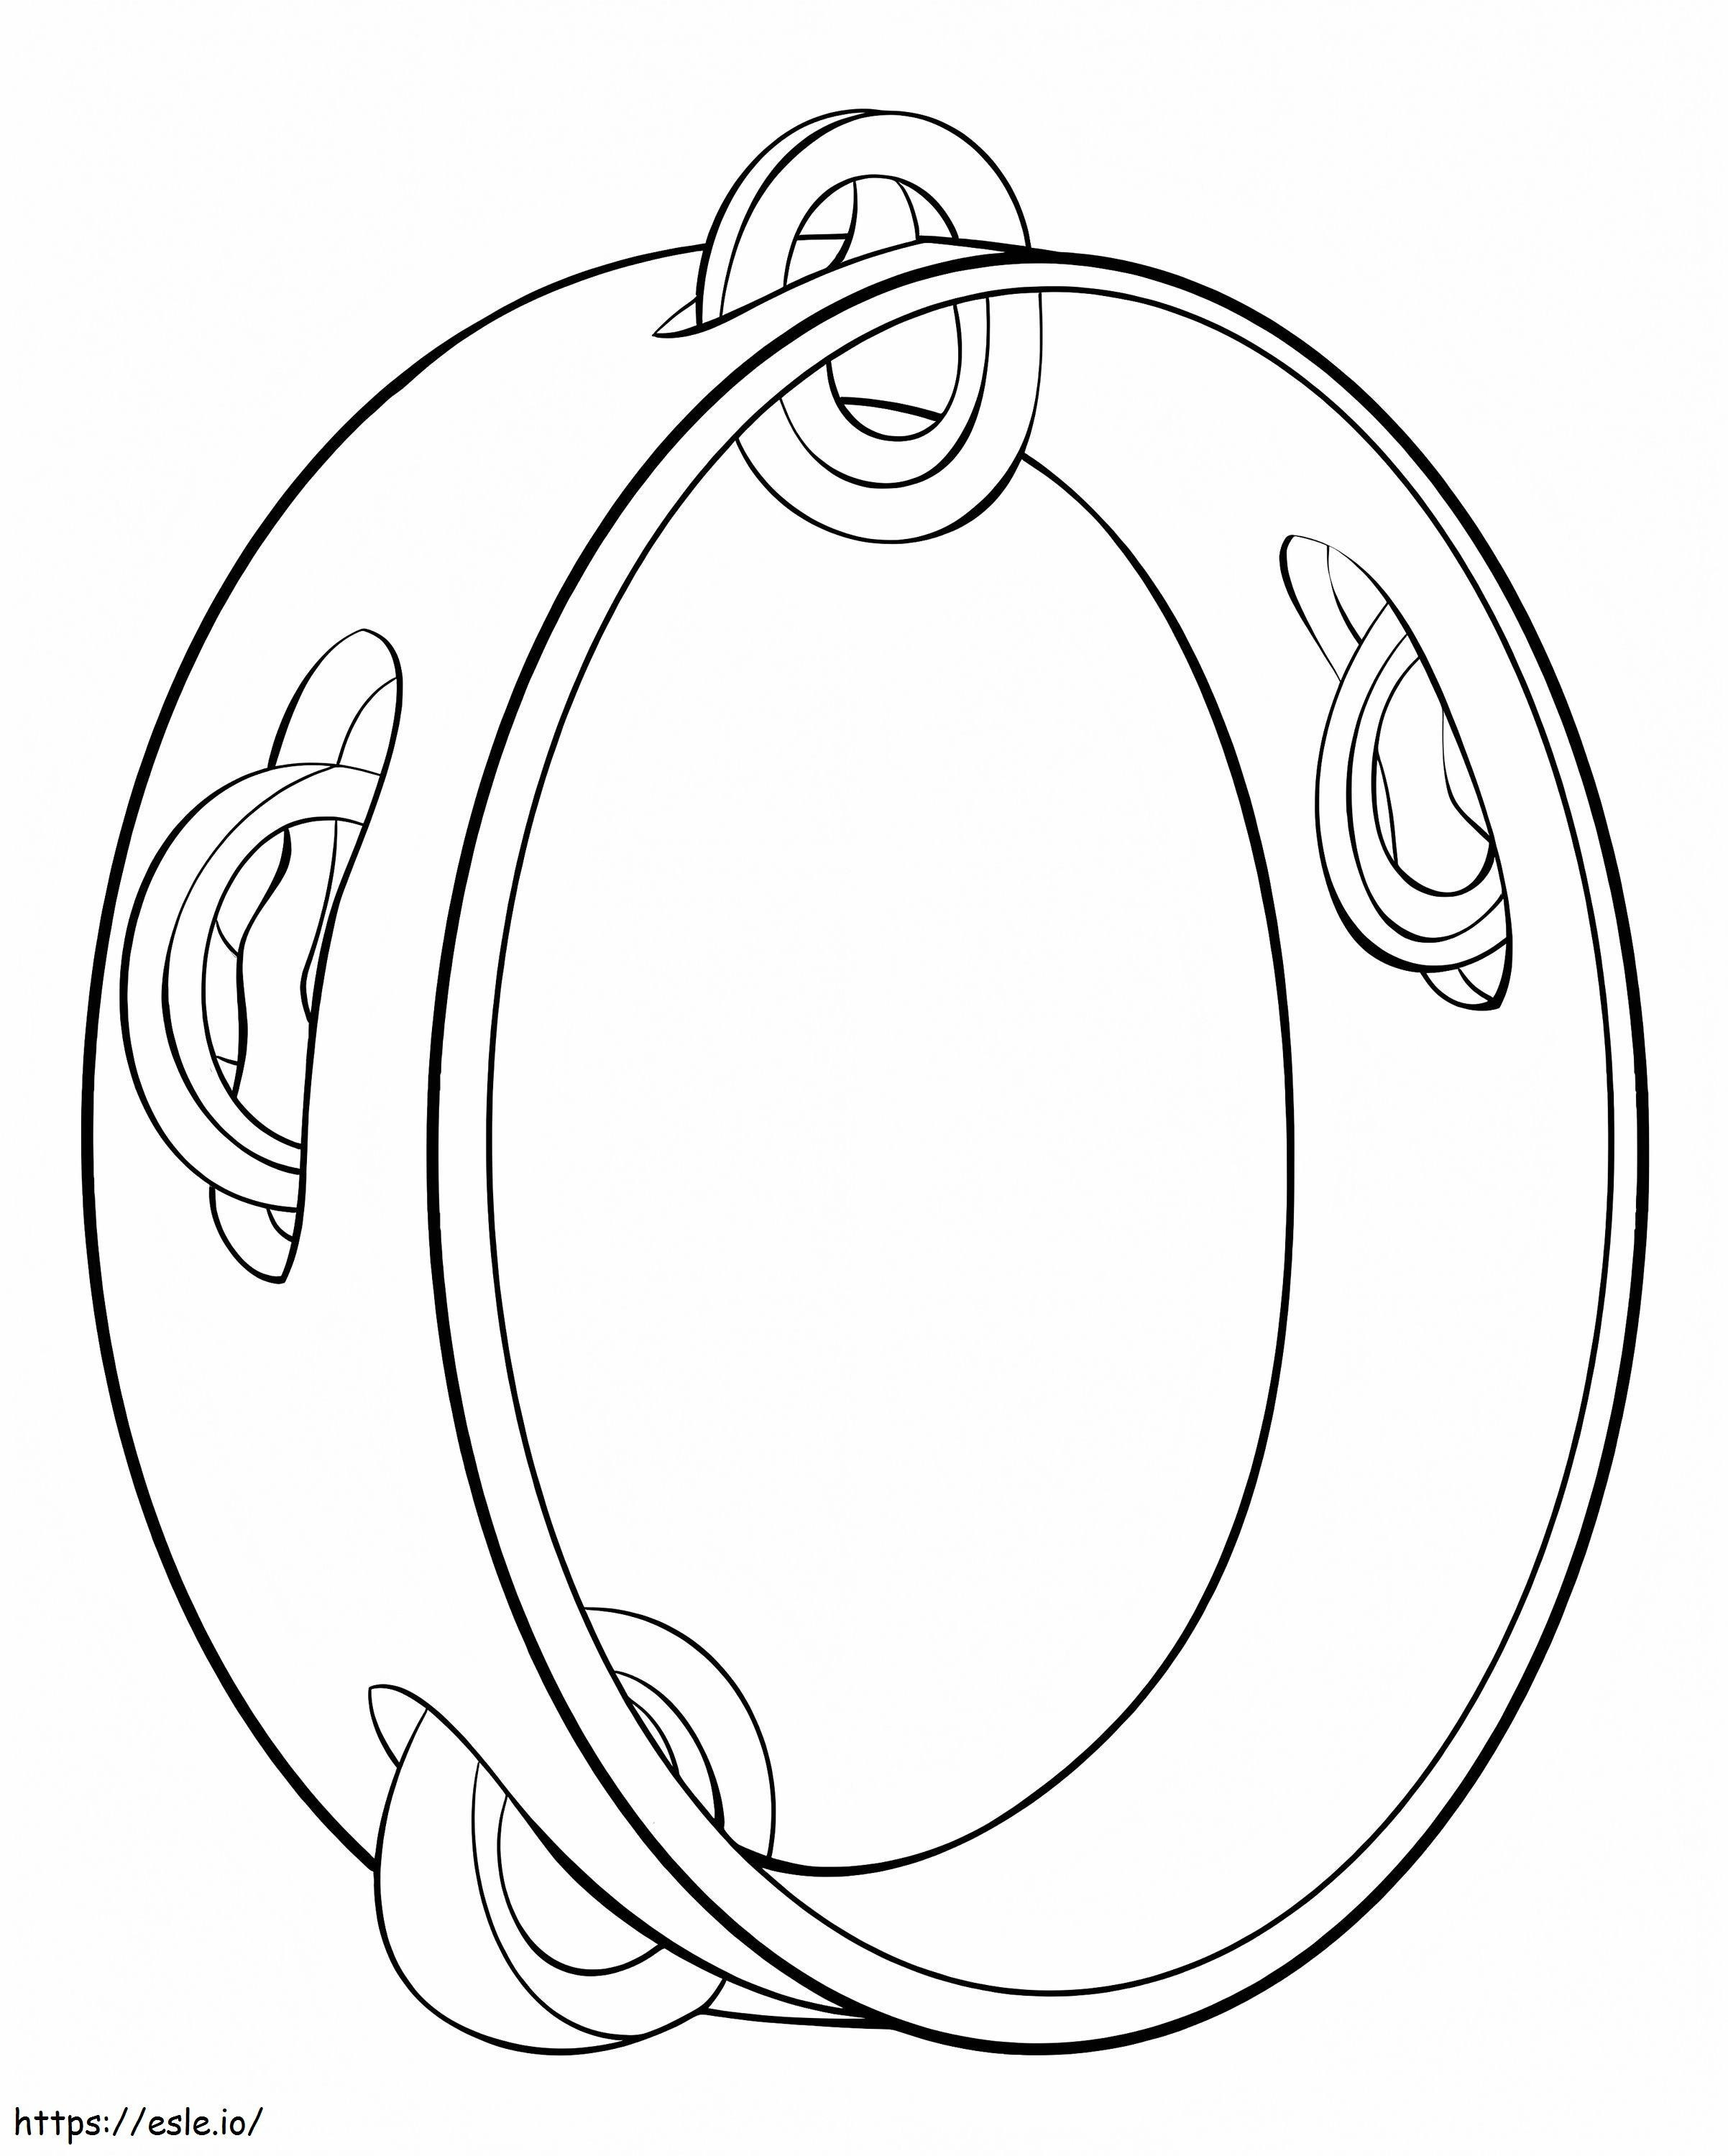 Basic Tambourine 1 coloring page